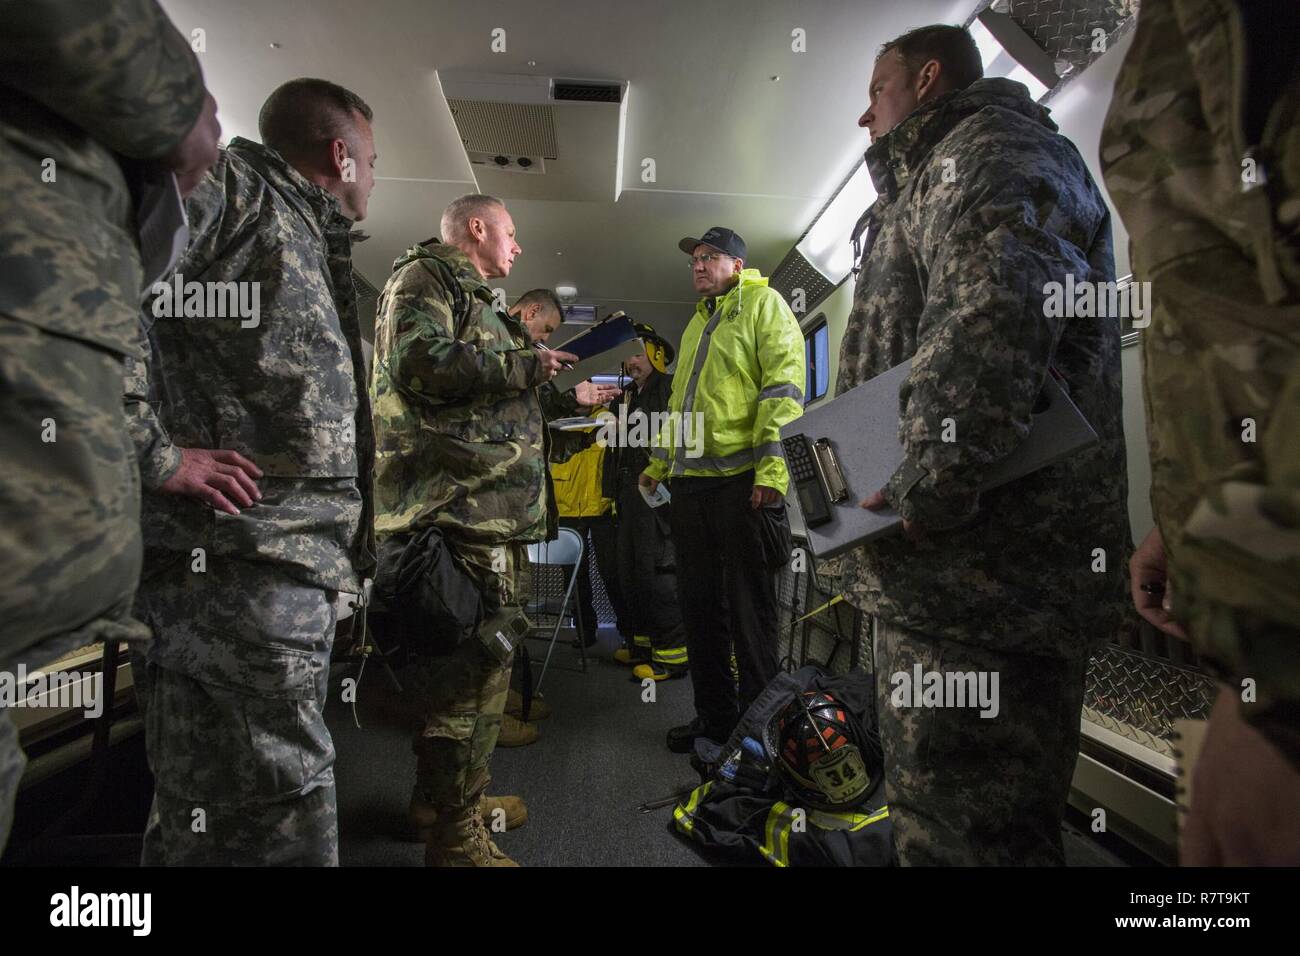 Lt. Col. George Christenson, third from left, commander of the New Jersey National Guard's 21st Weapons of Mass Destruction-Civil Support Team, is briefed by members of the Monmouth County Hazmat team during a joint training exercise at Fort Monmouth, N.J., April 6, 2017. The 21st WMD-CST is a joint unit comprised of New Jersey National Guard Soldiers and Airmen whose mission is to support civil authorities by identifying chemical, biological, radiological, and nuclear substances in either man-made or natural disasters. (New Jersey National Guard Stock Photo